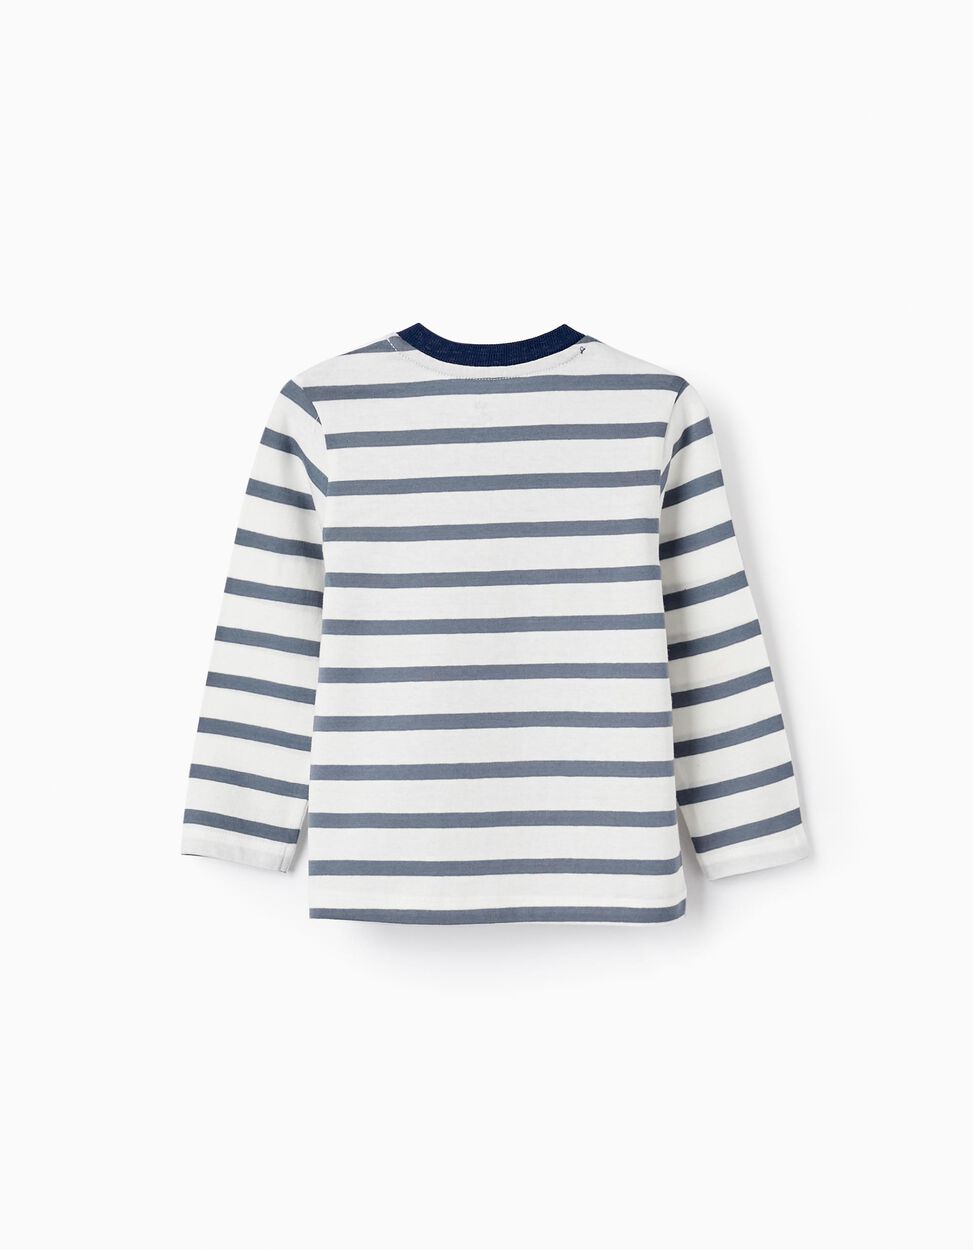 Buy Online Long Sleeve T-shirt for Baby Boys 'Mickey', White/Blue